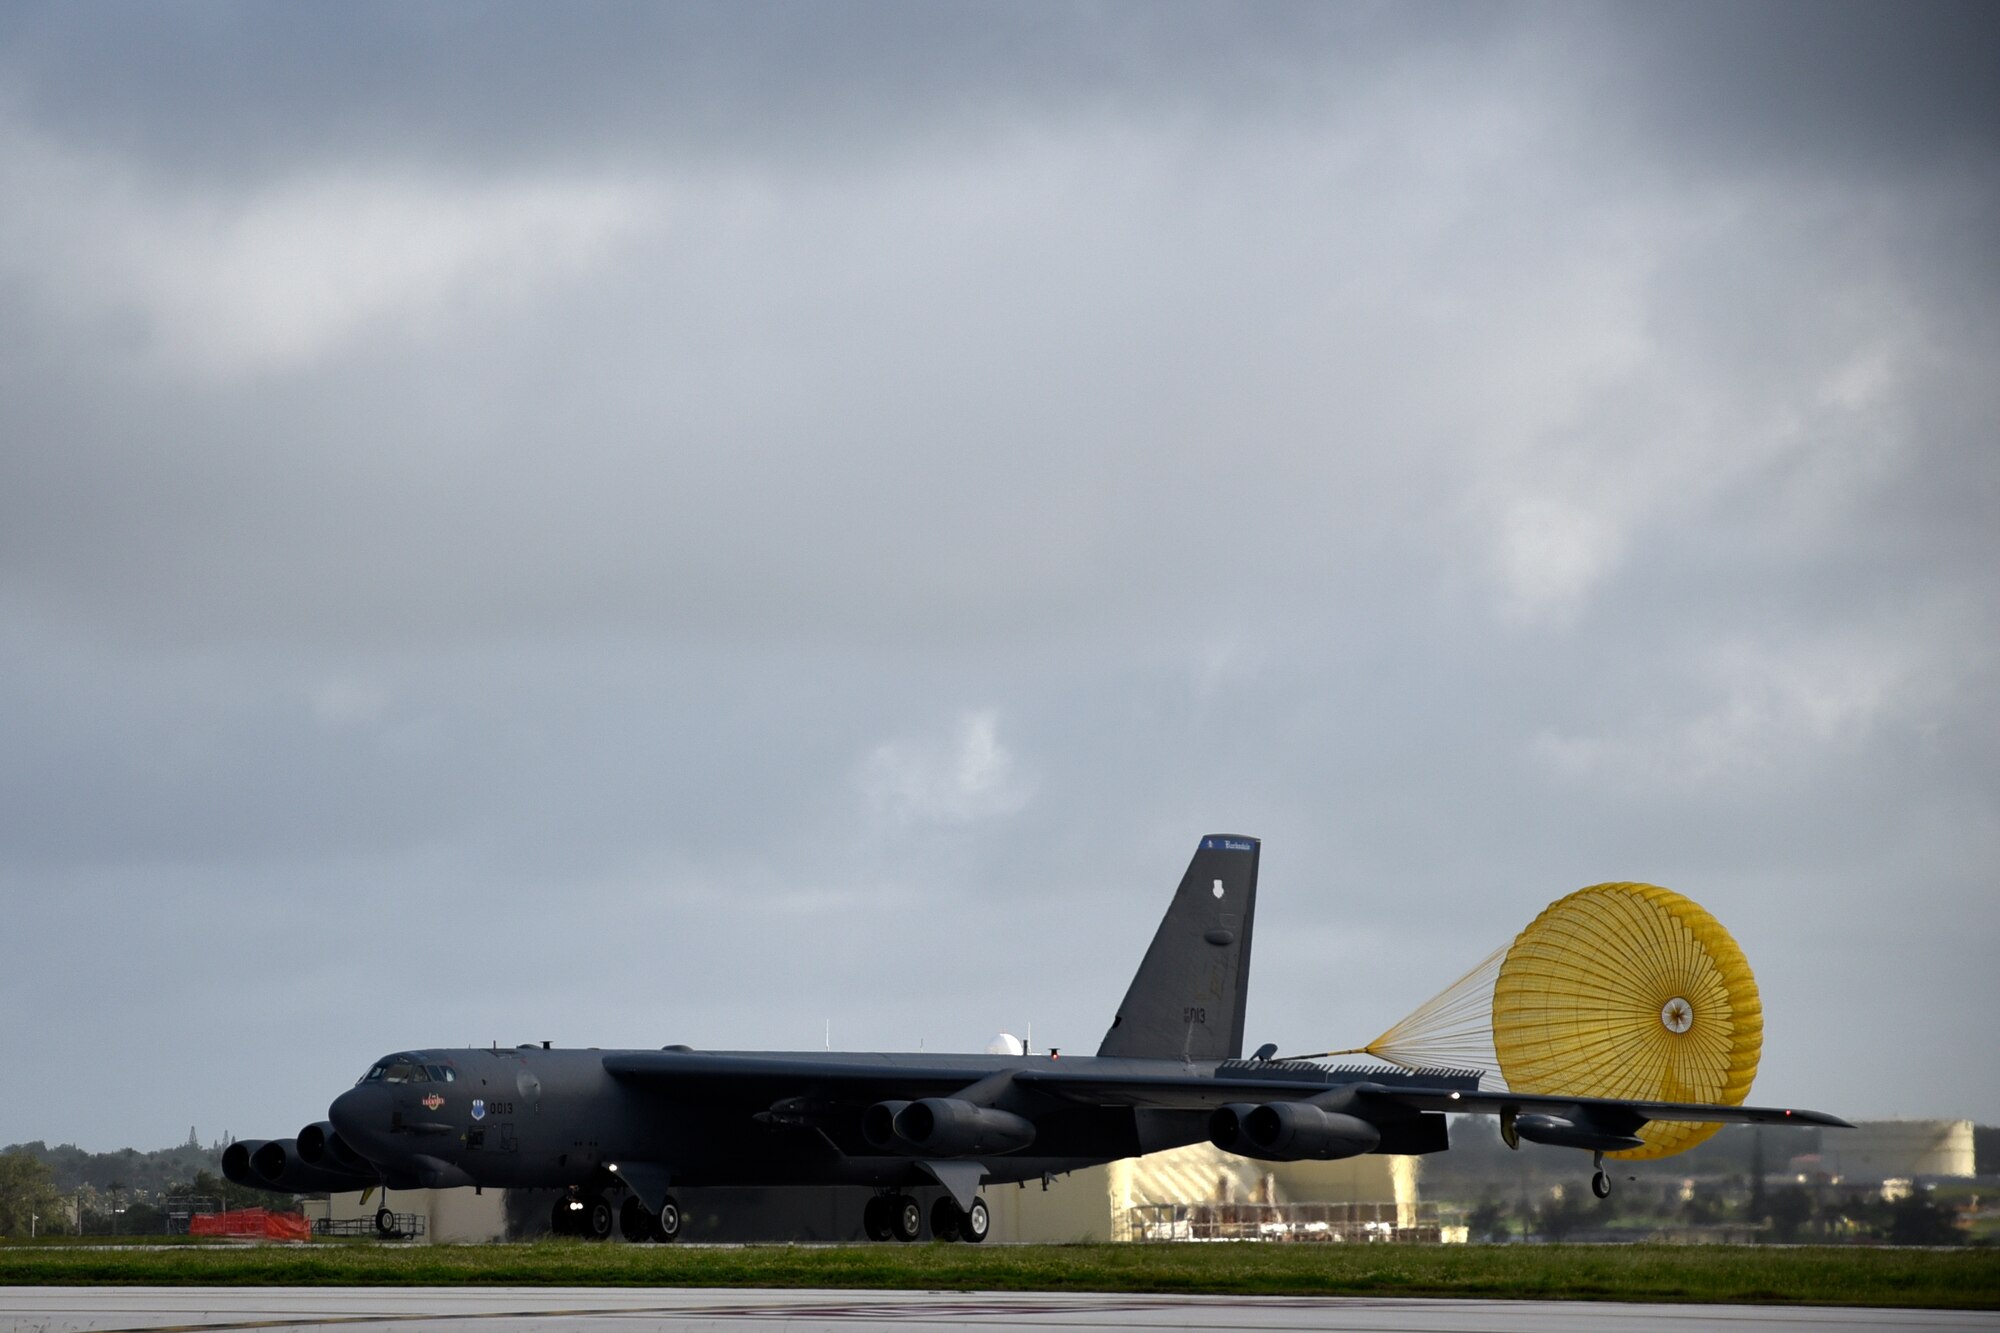 A U.S. Air Force B-52H Stratofortress bomber, deployed from Barksdale Air Force Base, Louisiana, lands at Andersen Air Force Base, Guam, after a routine training mission May 2, 2018.